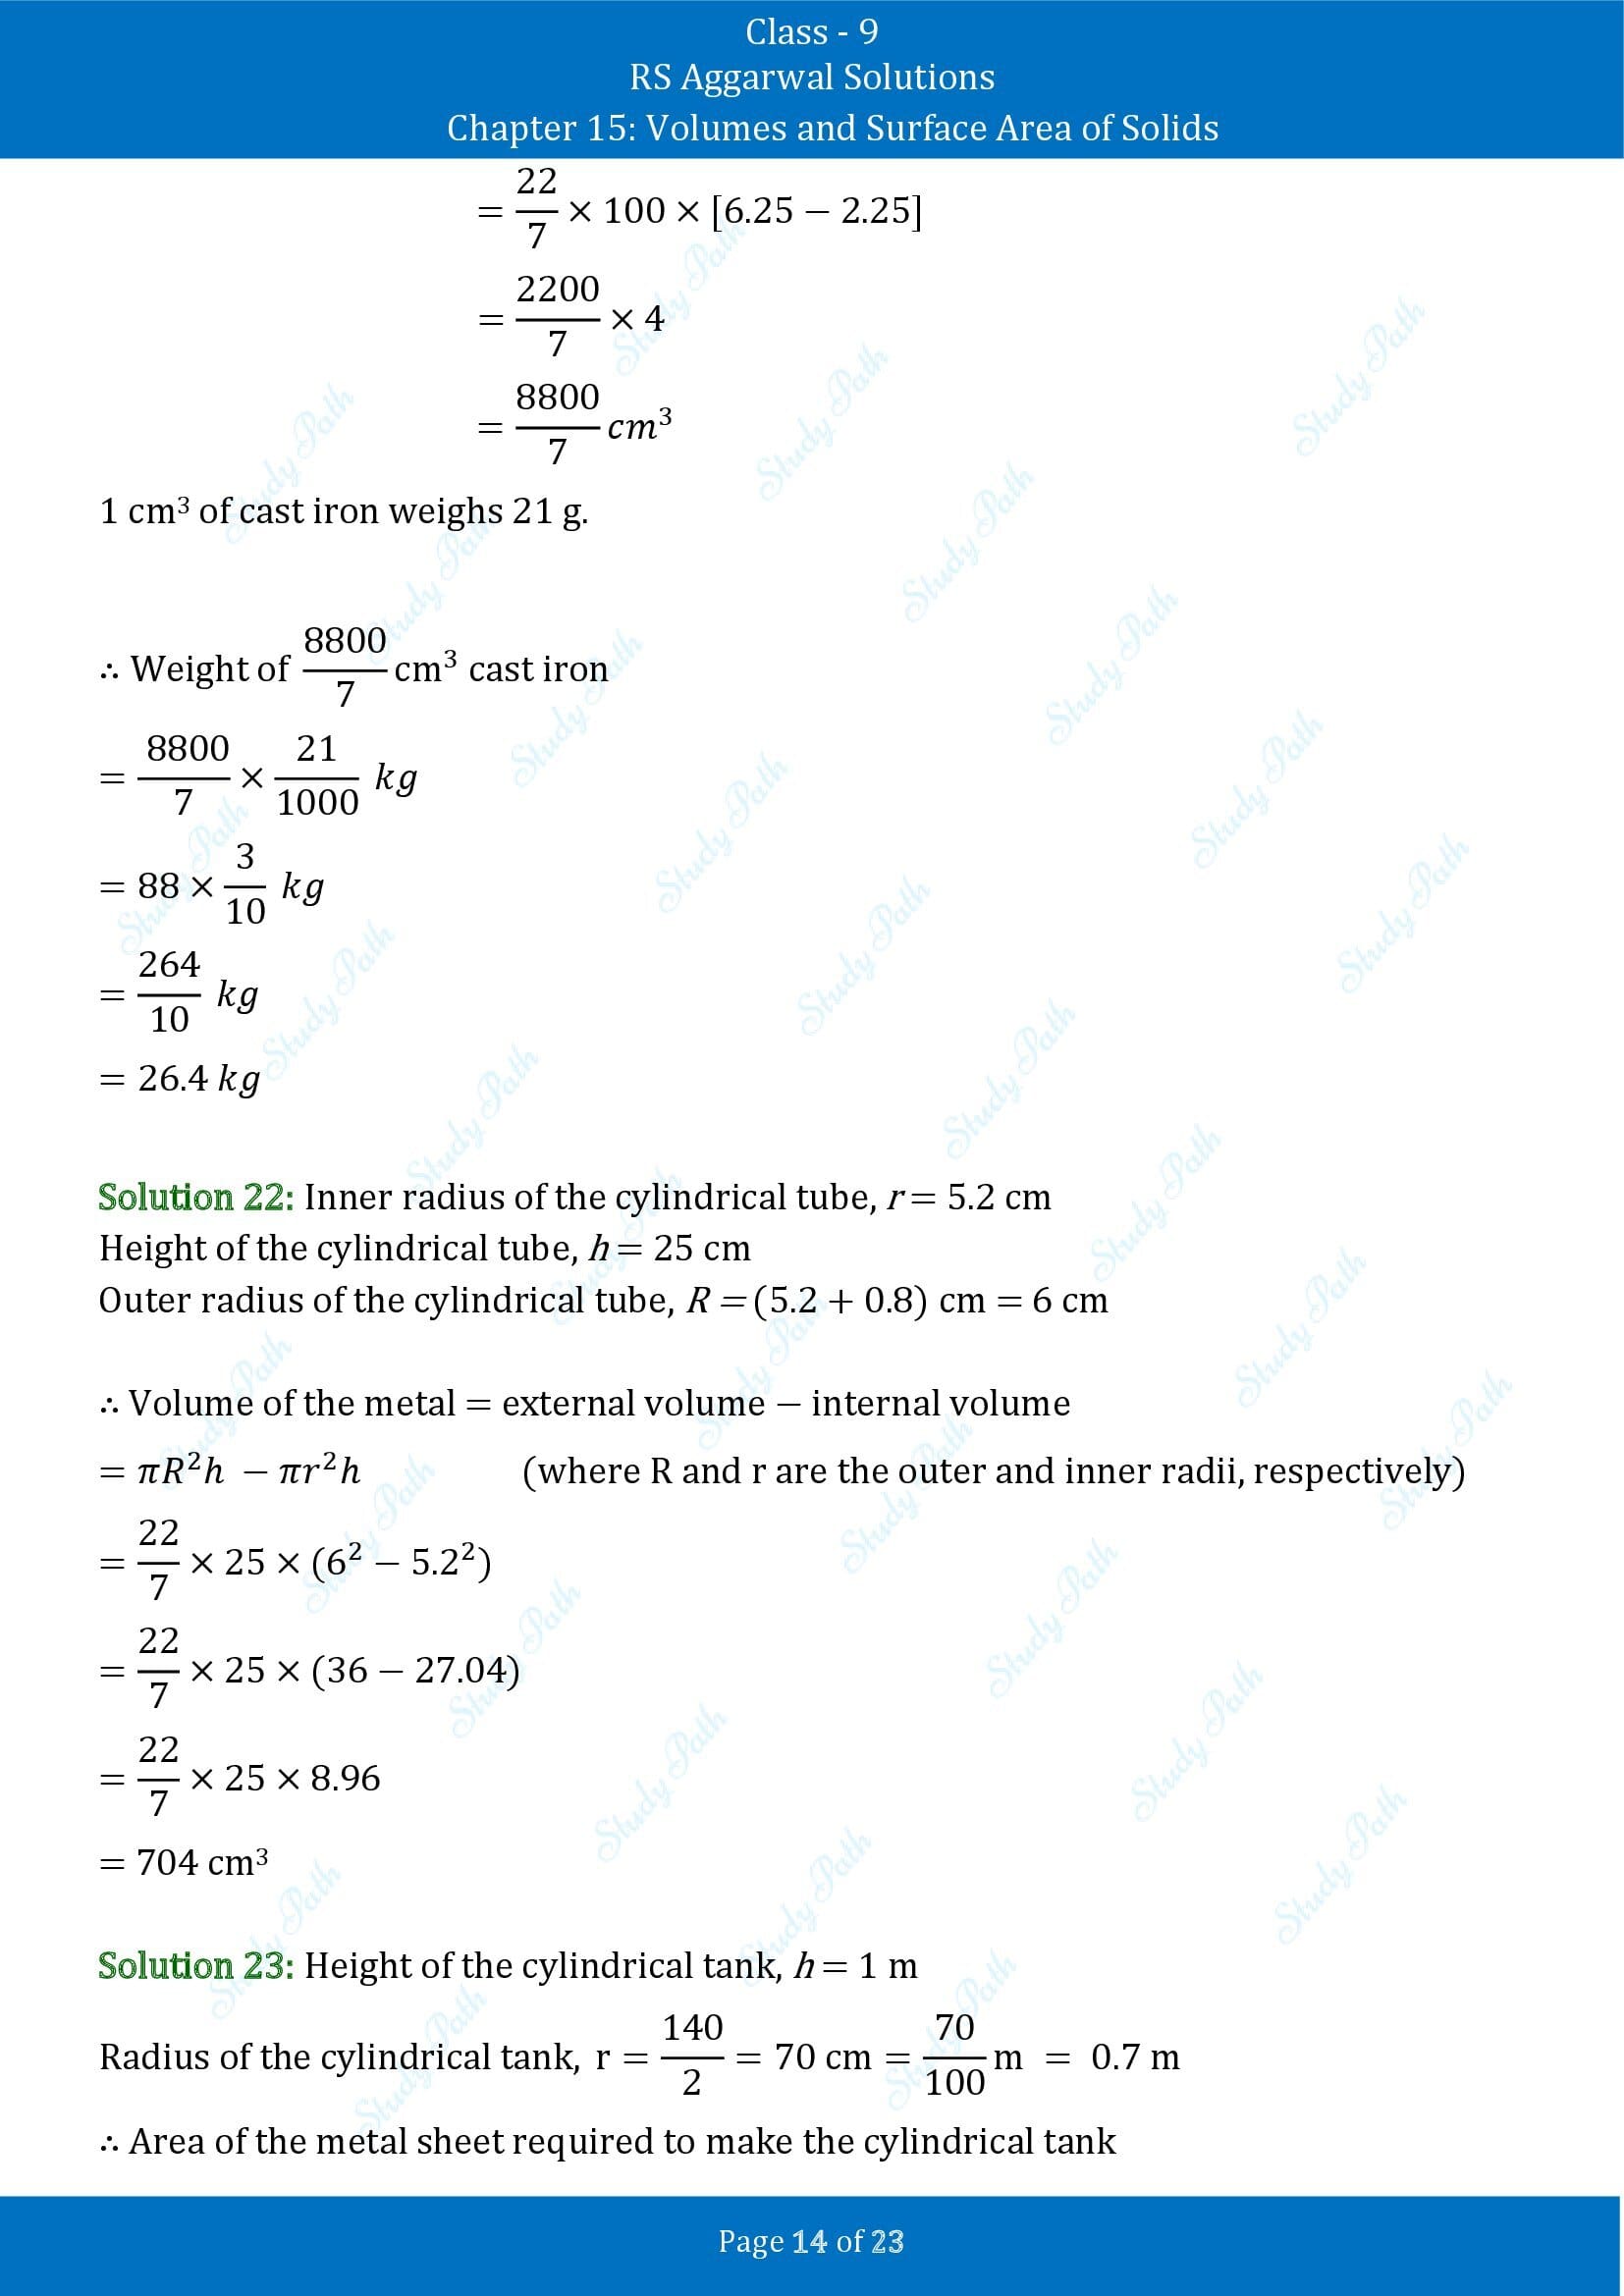 RS Aggarwal Solutions Class 9 Chapter 15 Volumes and Surface Area of Solids Exercise 15B 00014